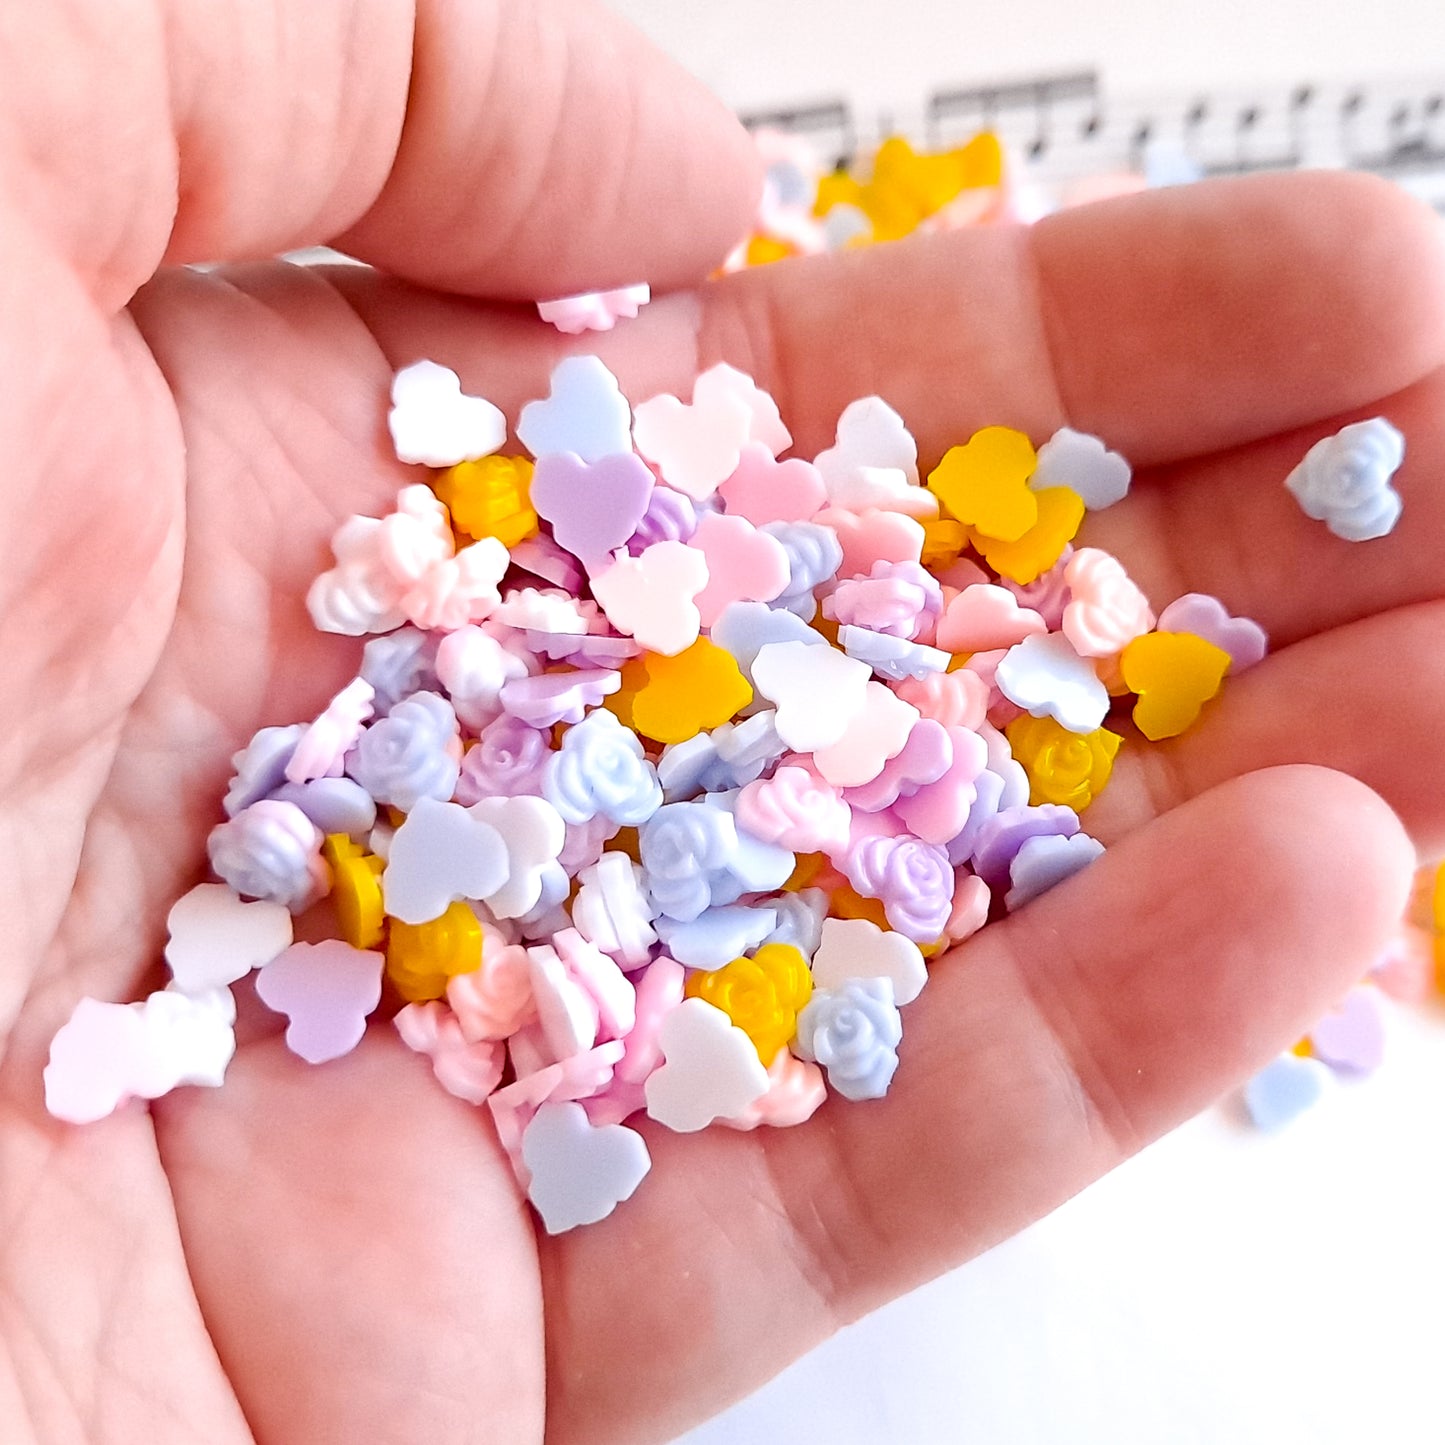 6.5mm Heart Flatbacks With Flower Detail, Glue On Cabochon Resin Confetti Decoden Embellishment for Nail Art Jewelrymaking and Crafting